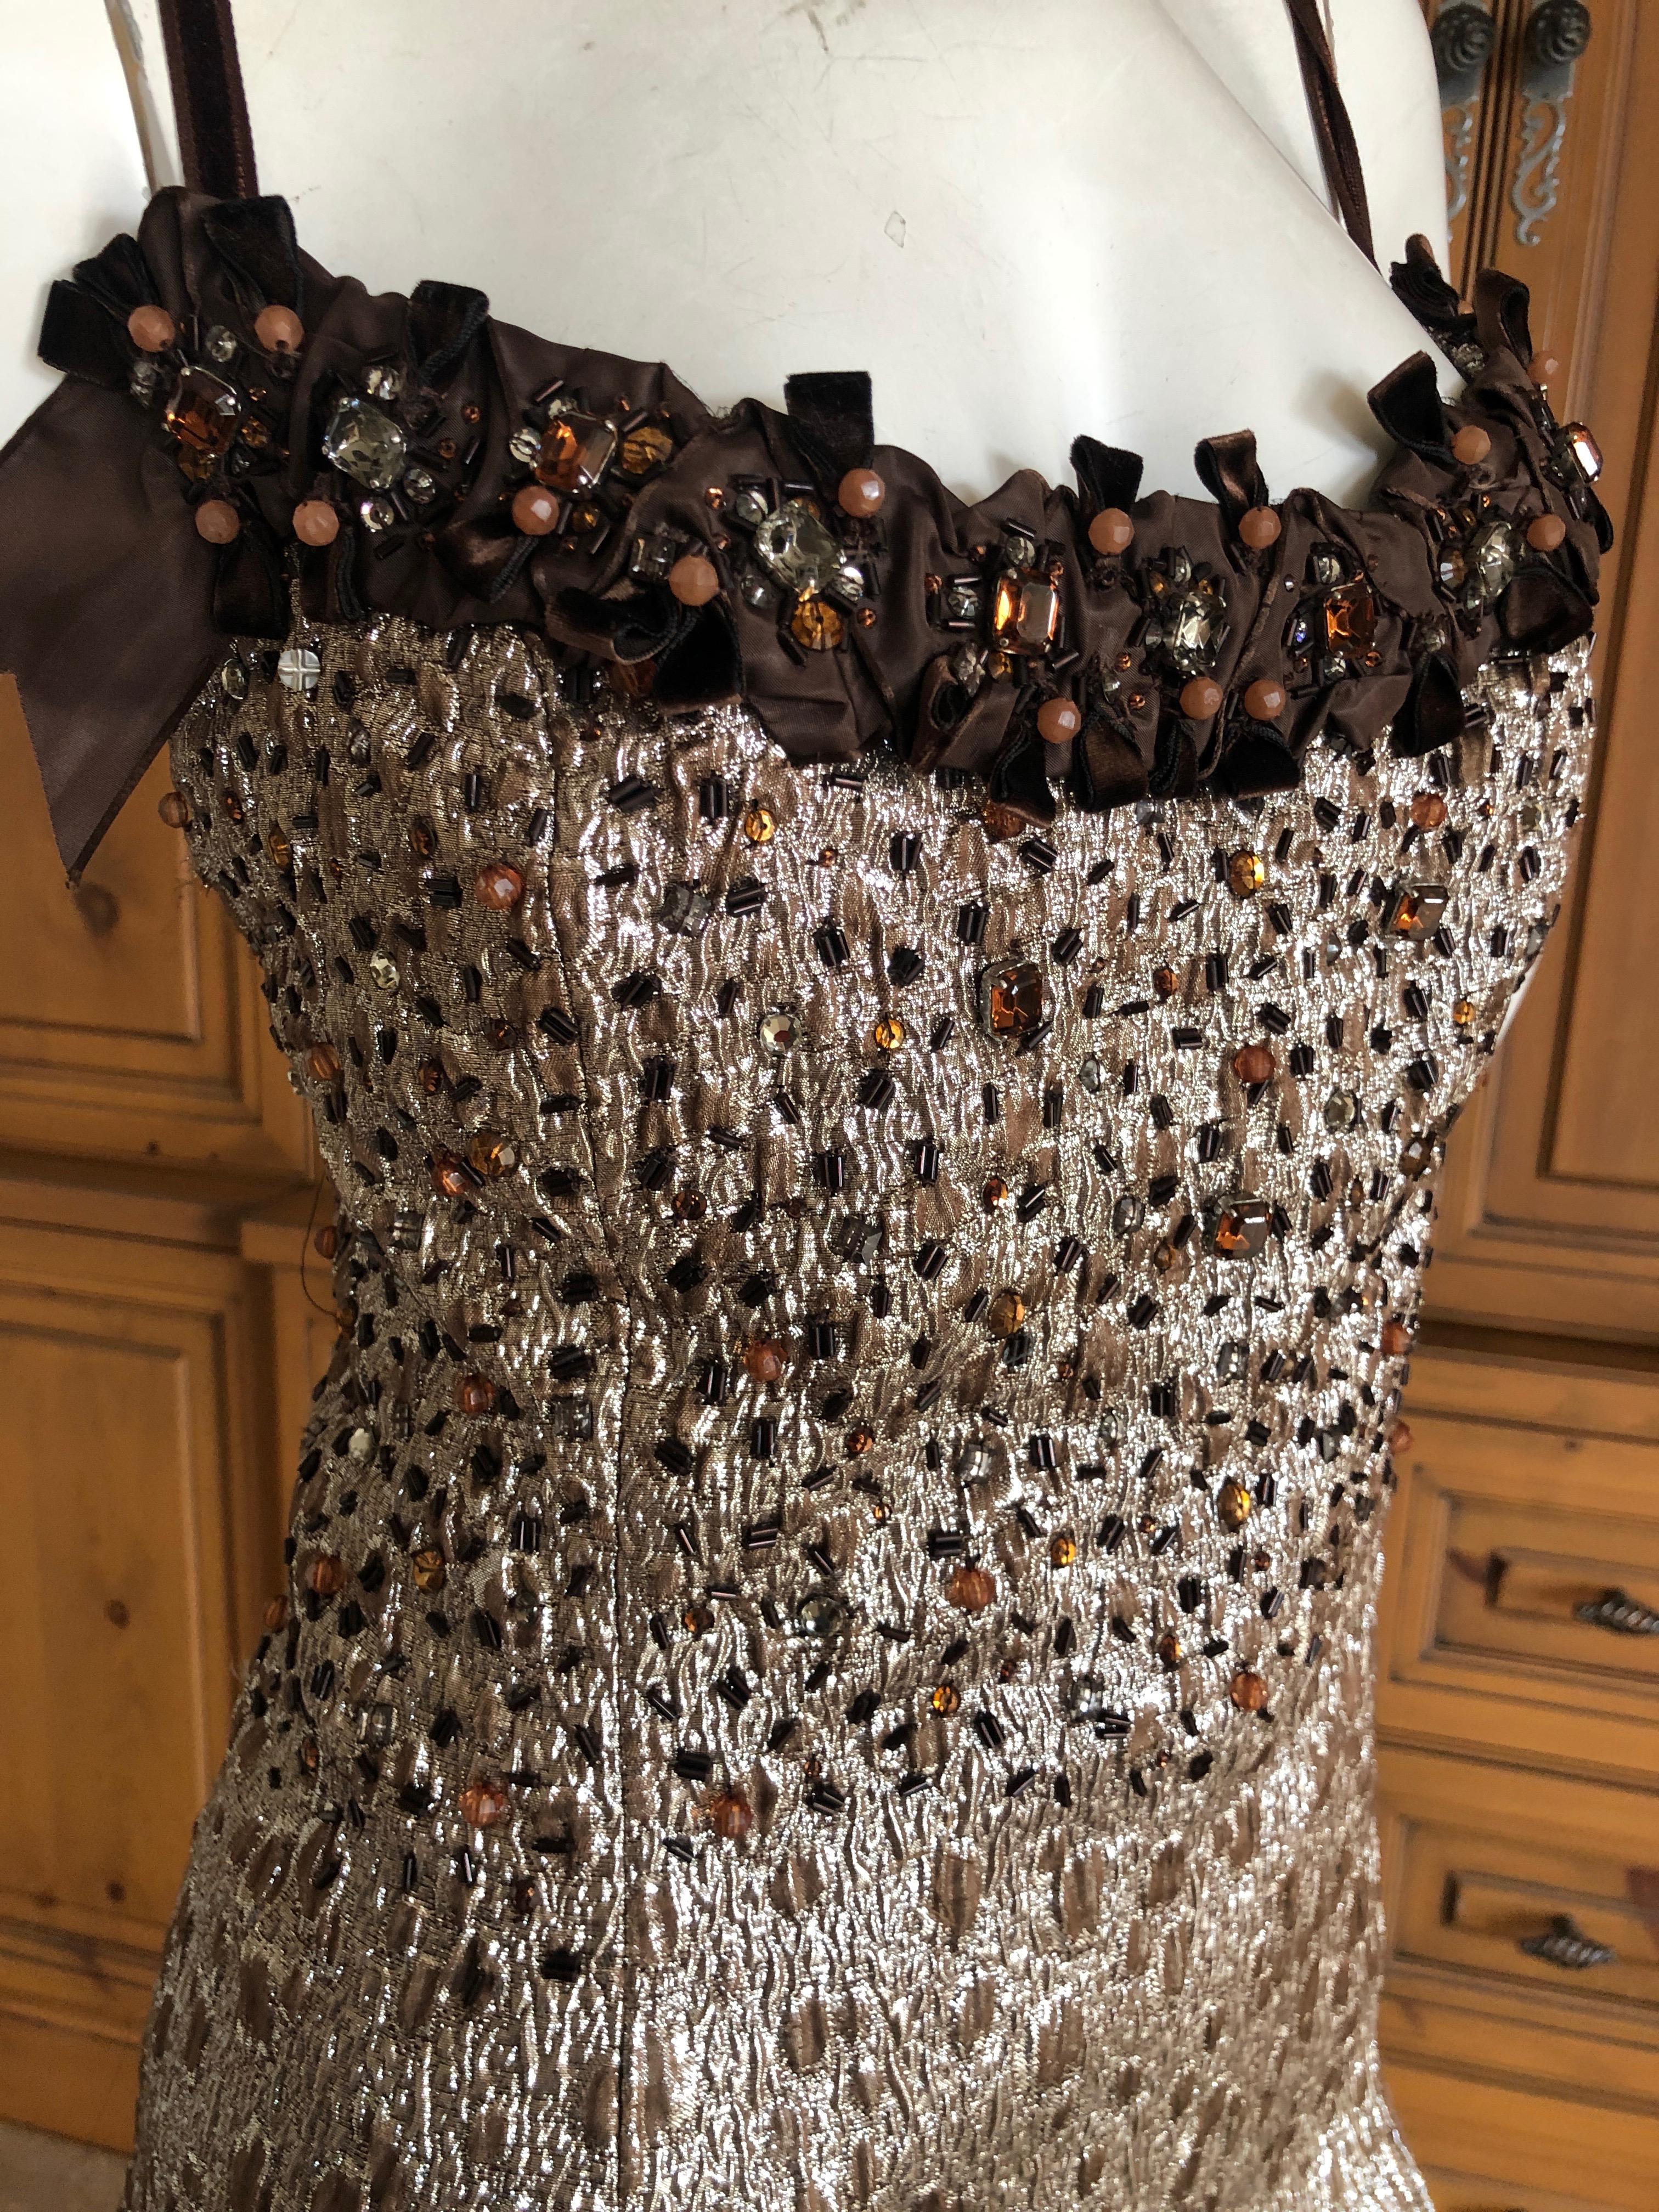 Carolina Herrera Gold Embellished Evening Gown in Hard to Find Size 14 In Excellent Condition For Sale In Cloverdale, CA